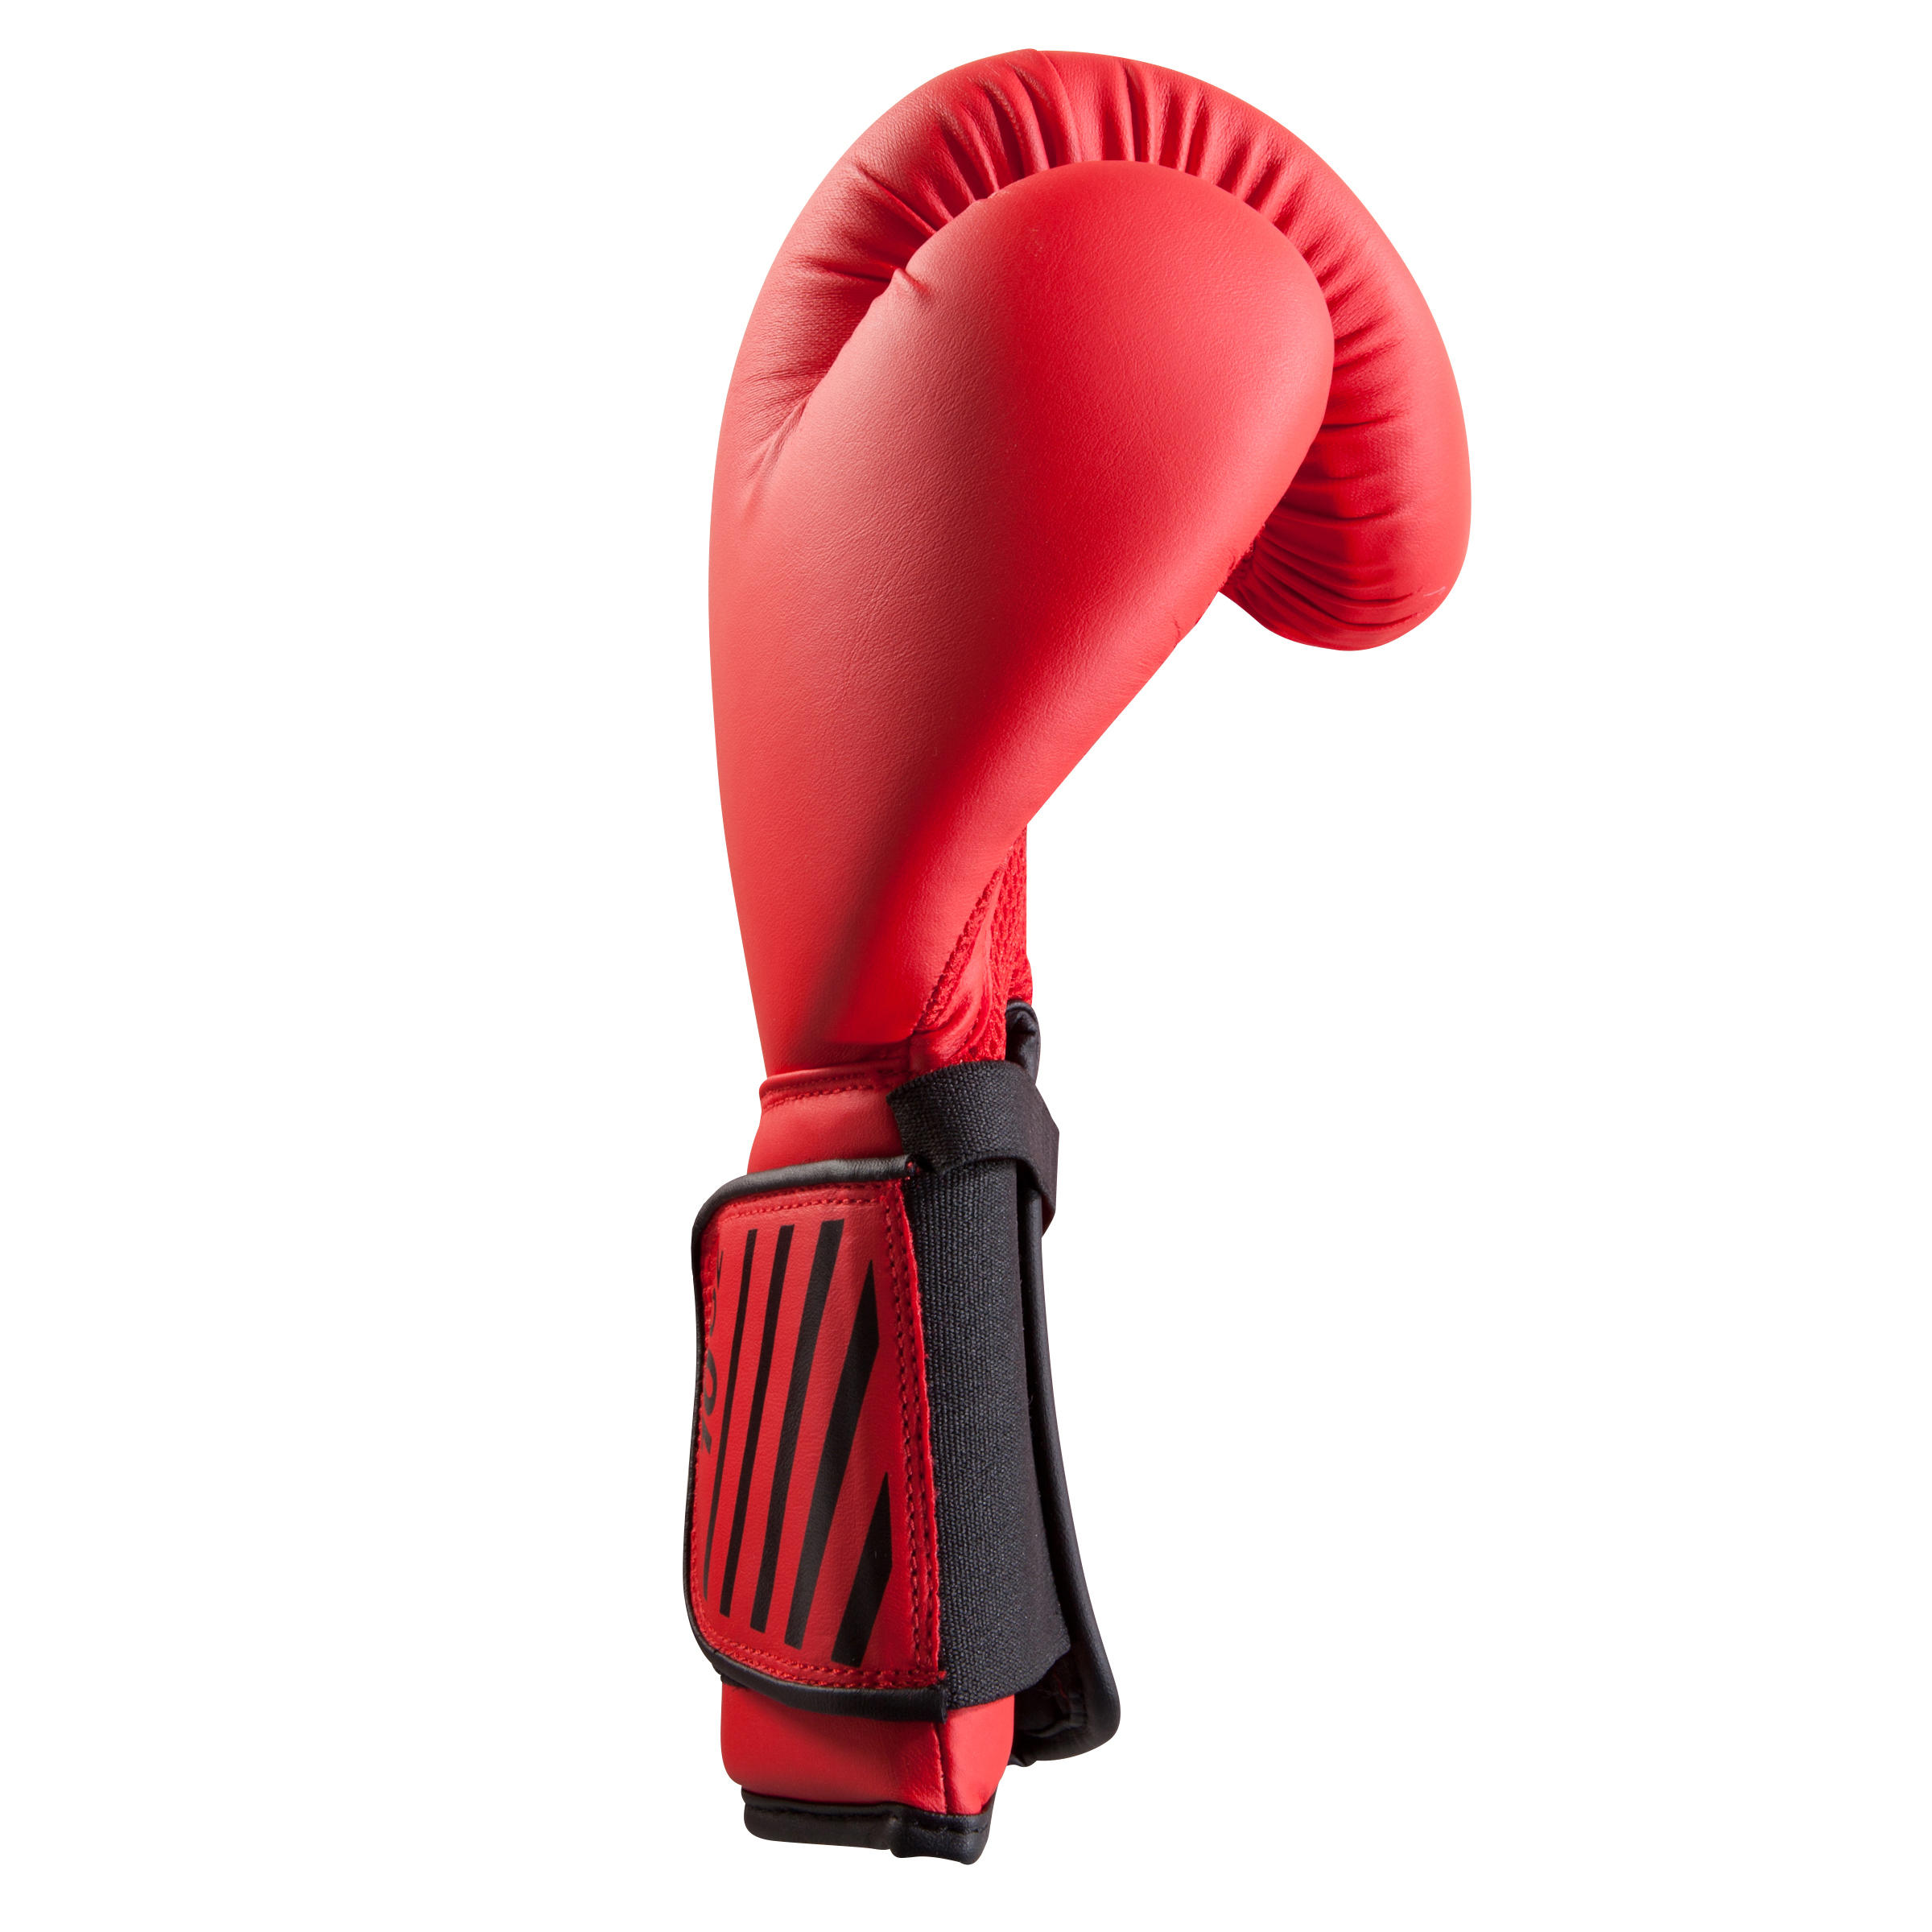 Touch boxing. Боксерские перчатки OUTSHOCK 12 oz. Перчатки OUTSHOCK 14 oz боксерские. Перчатки Decathlon OUTSHOCK. Перчатки для бокса OUTSHOCK 10 oz.